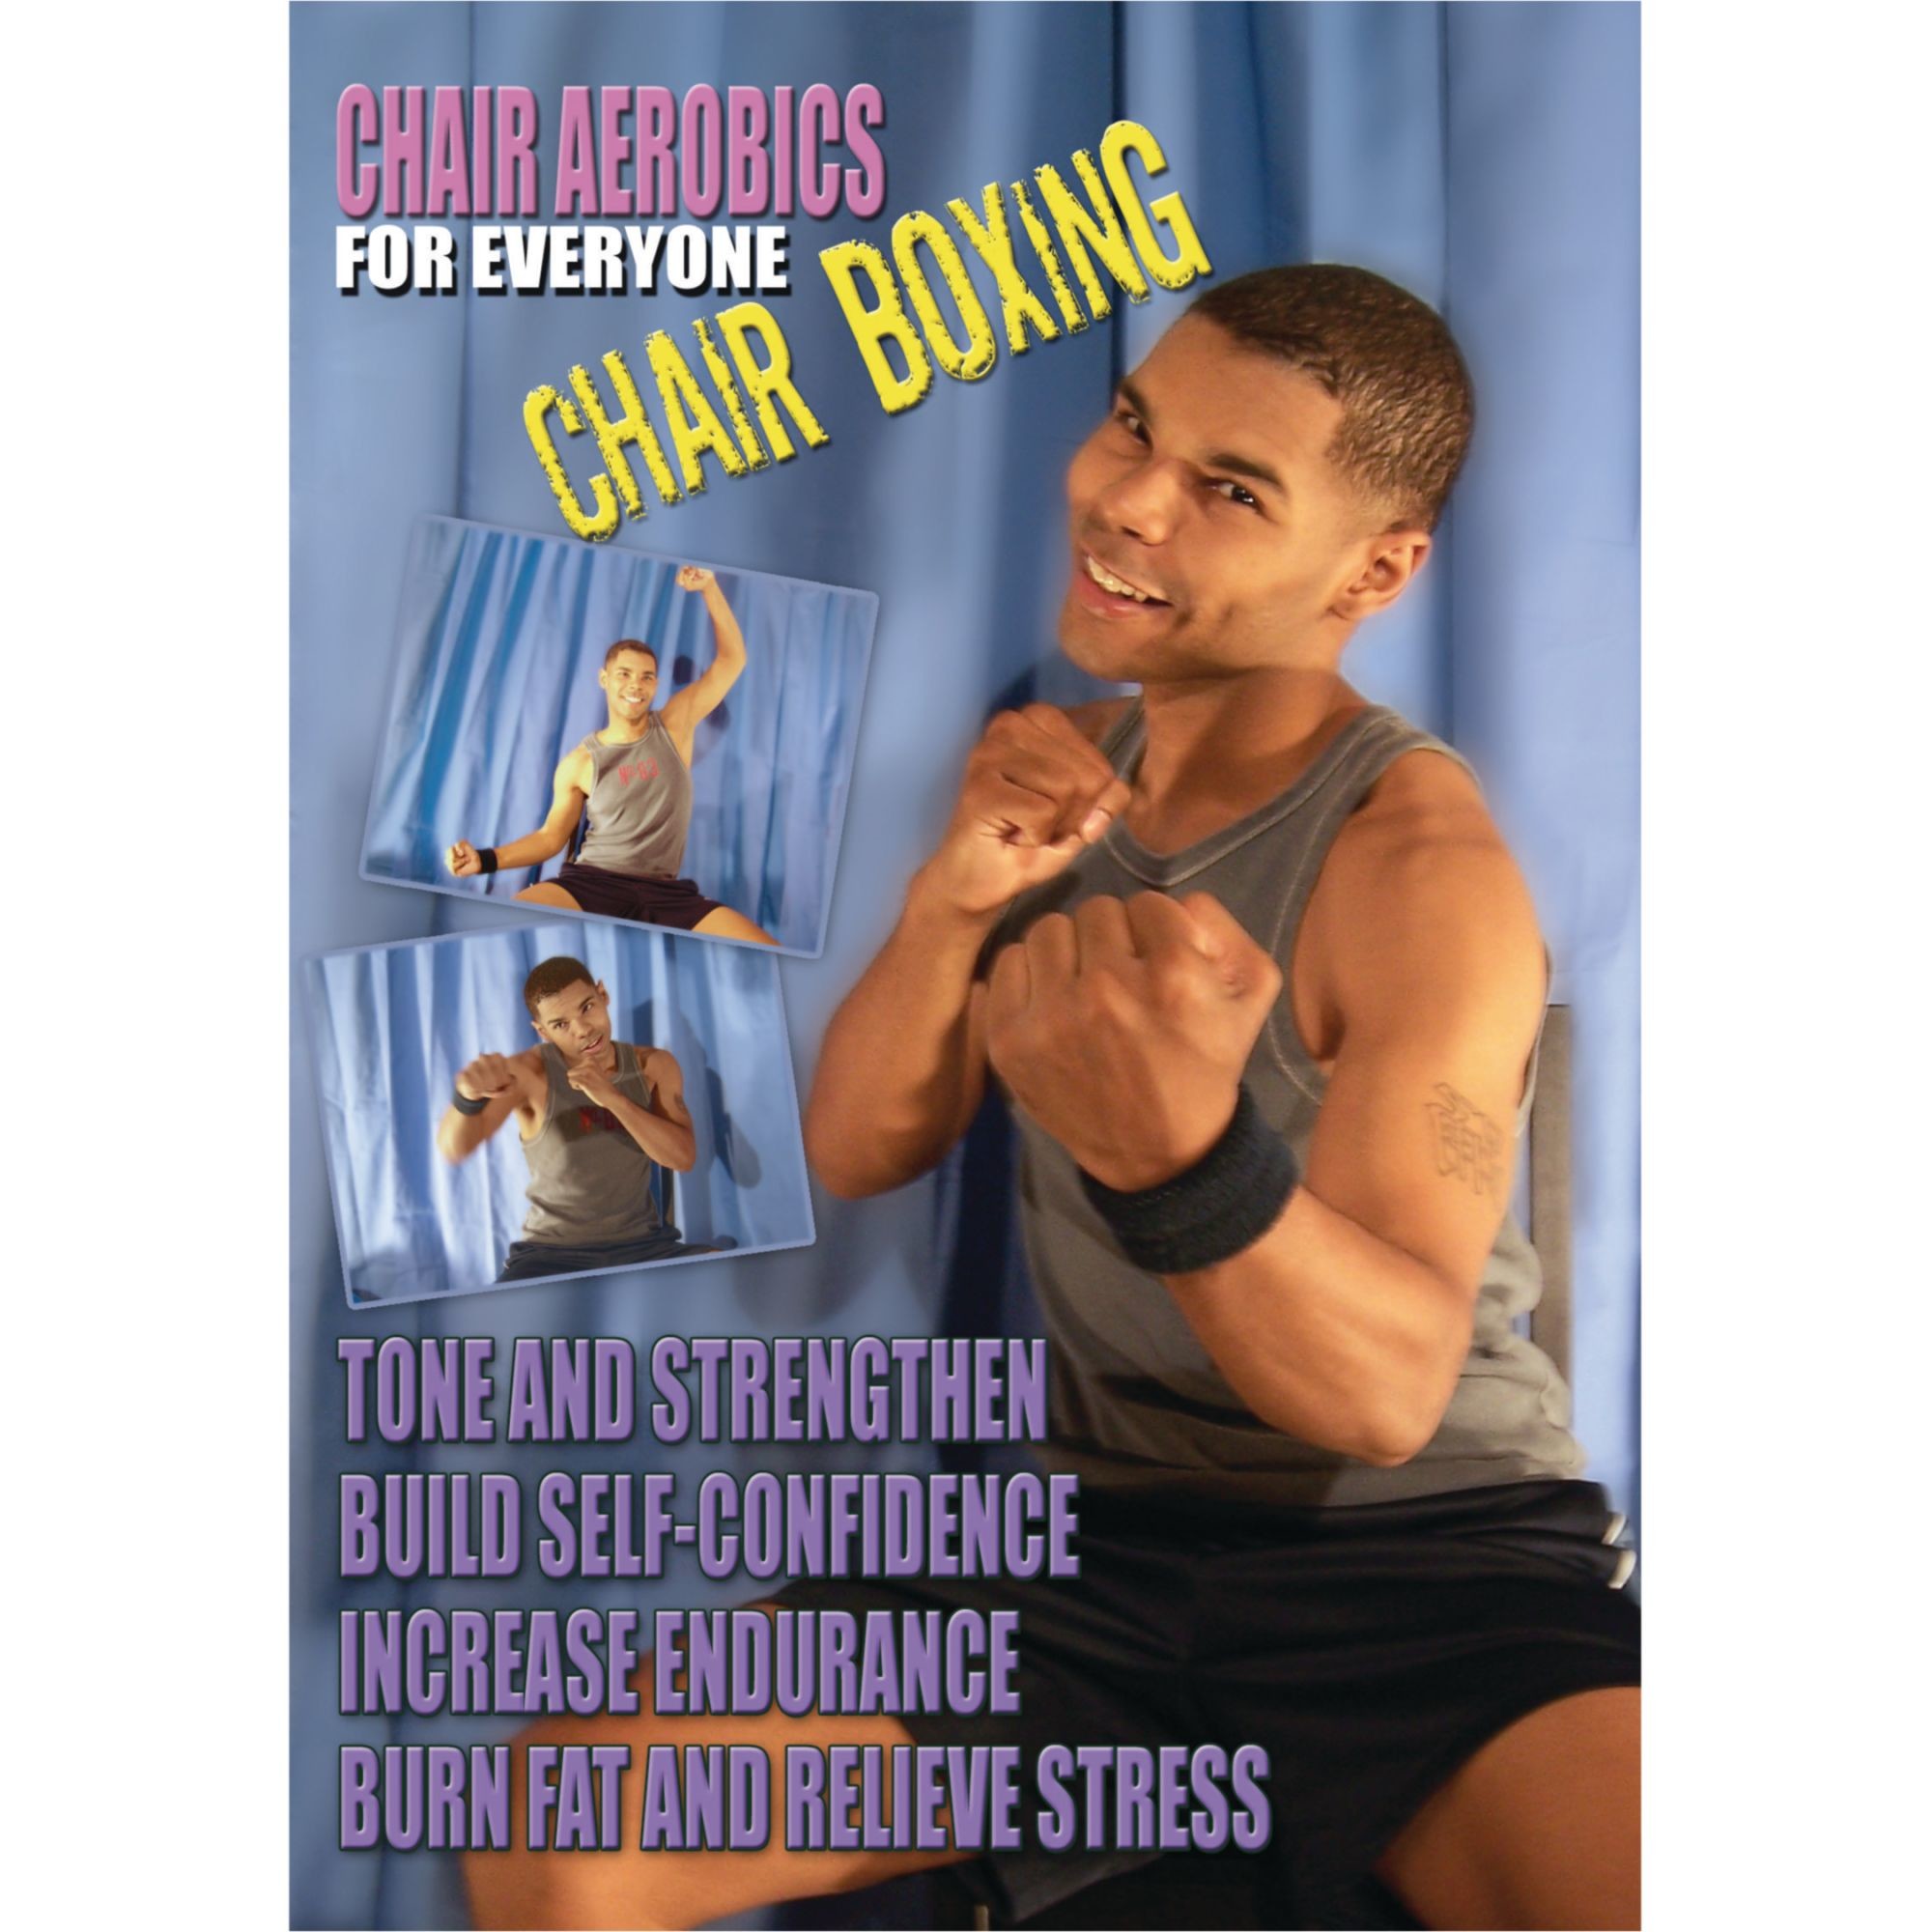 Chair Aerobics for Everyone - Chair Boxing